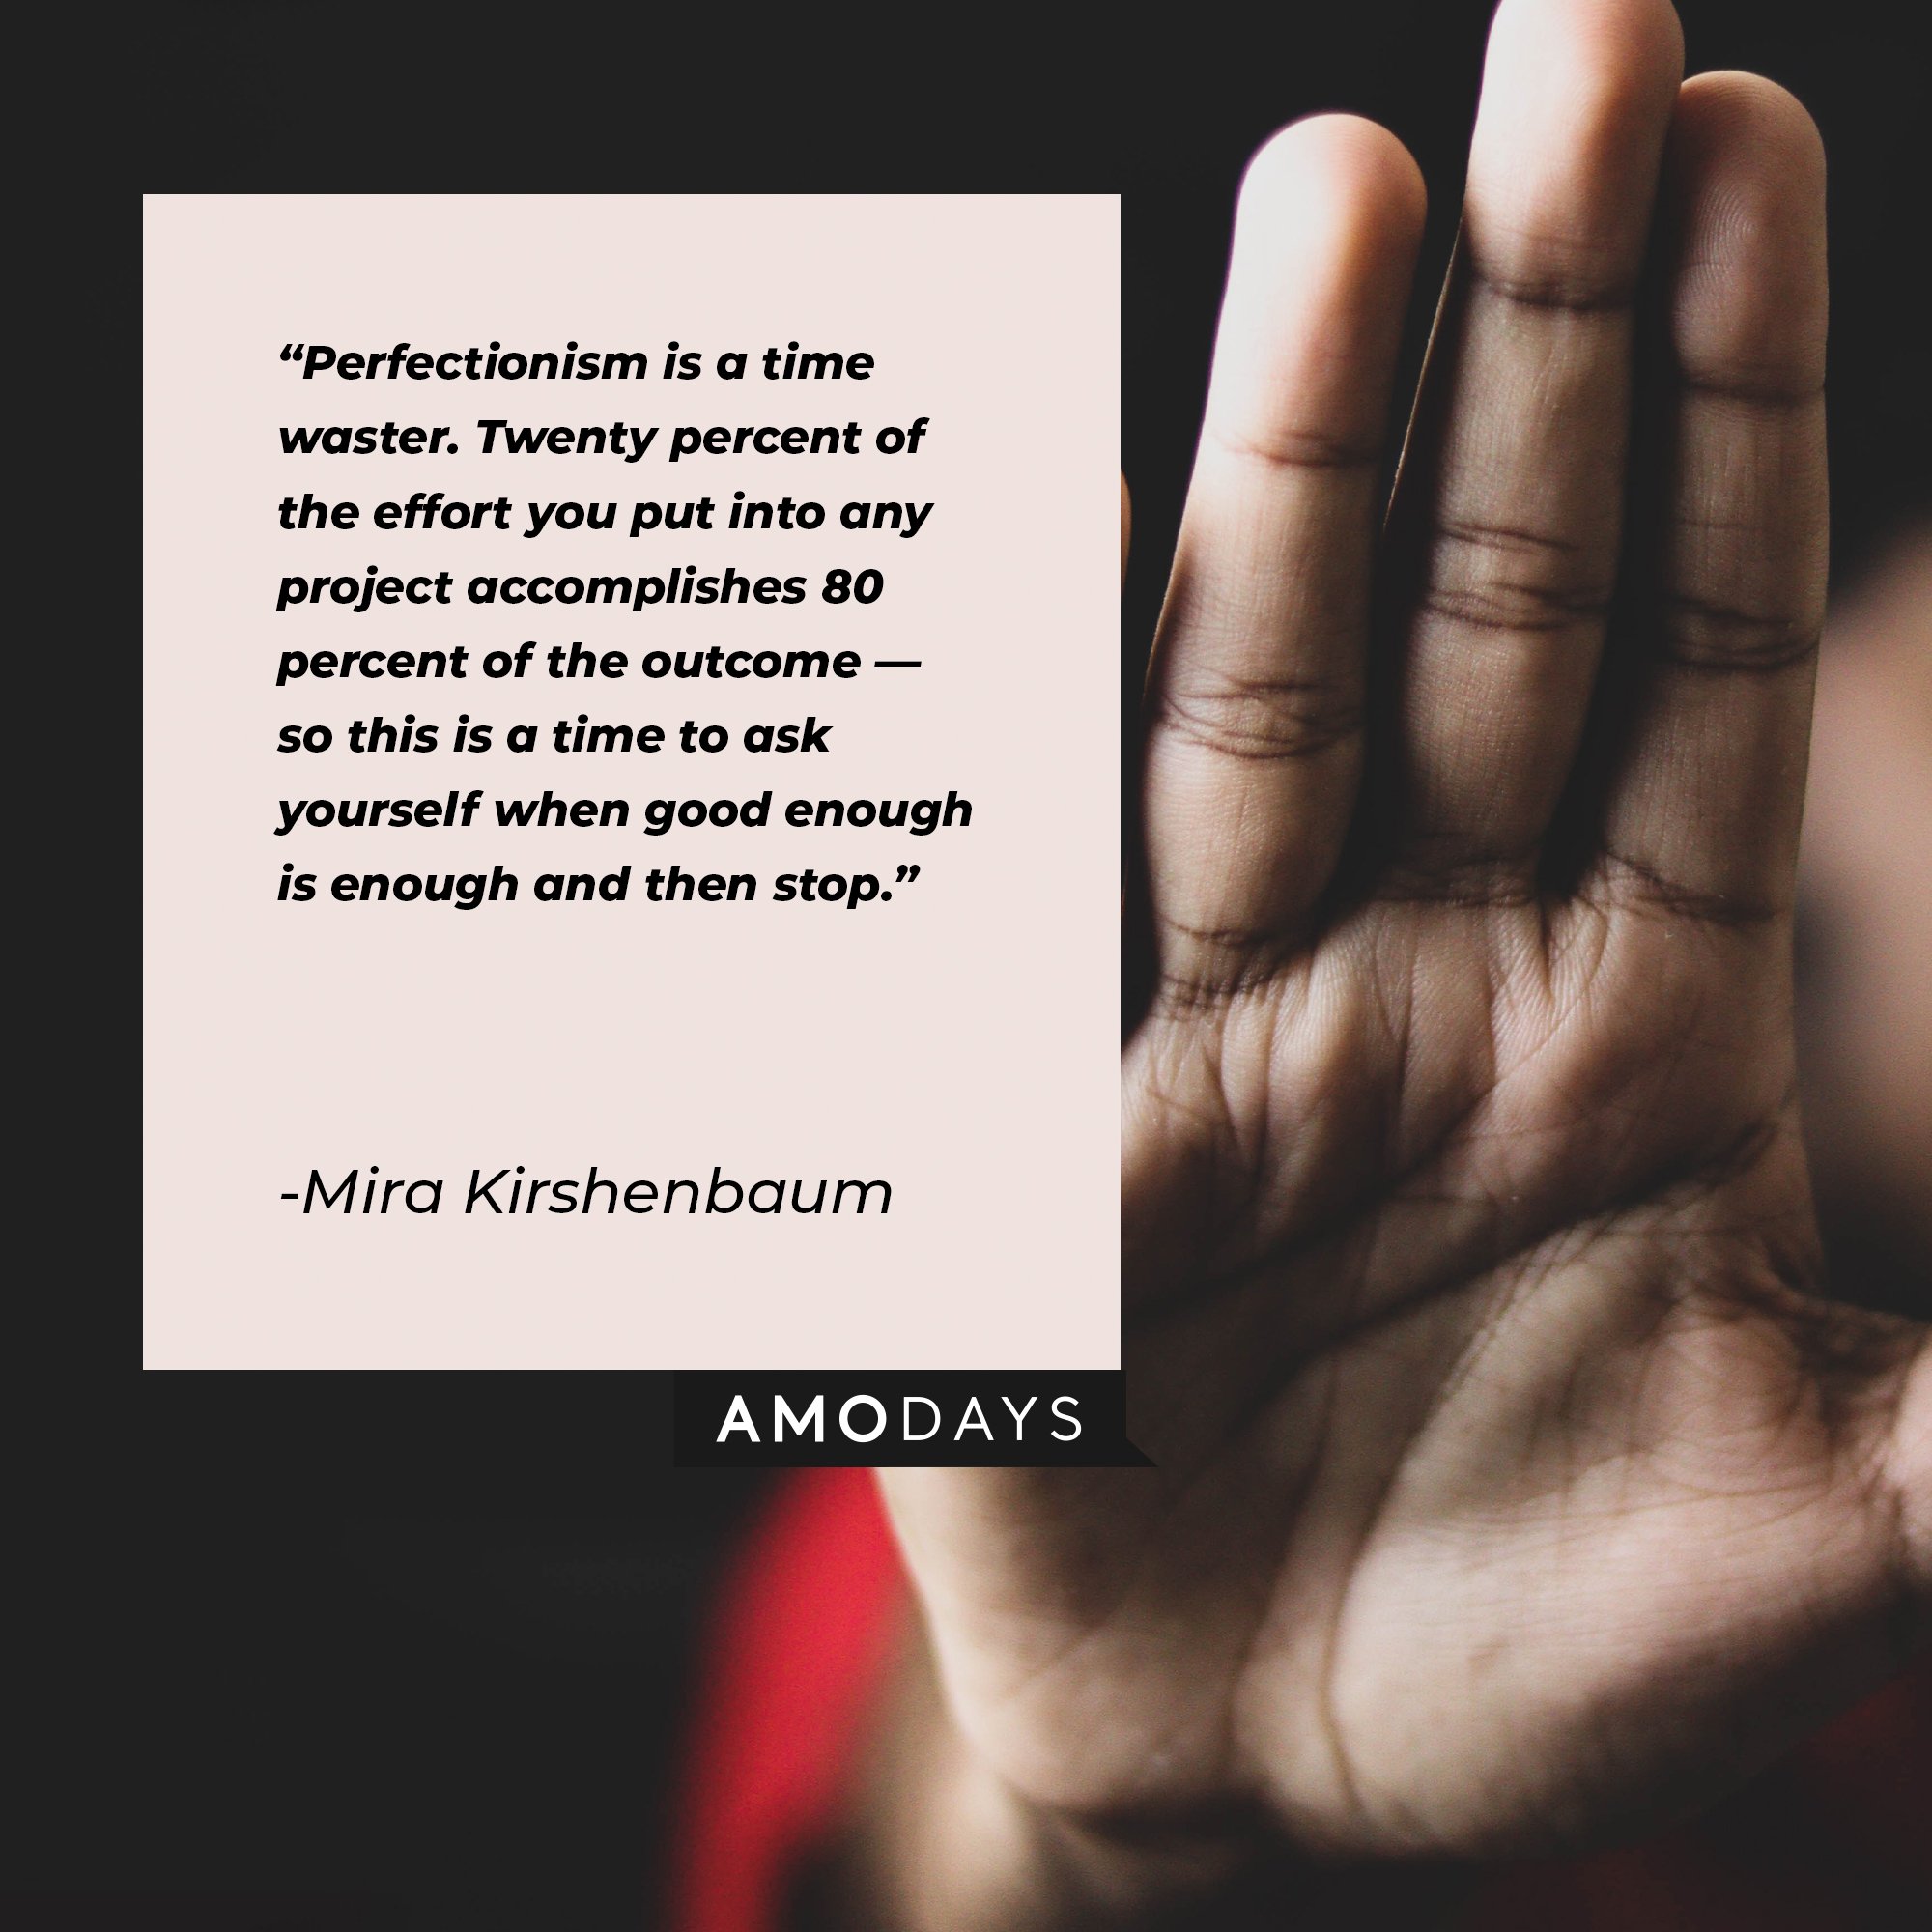 Mira Kirshenbaum’s quote: “Perfectionism is a time waster. Twenty percent of the effort you put into any project accomplishes 80 percent of the outcome — so this is a time to ask yourself when good enough is enough and then stop.” | Image: AmoDays 